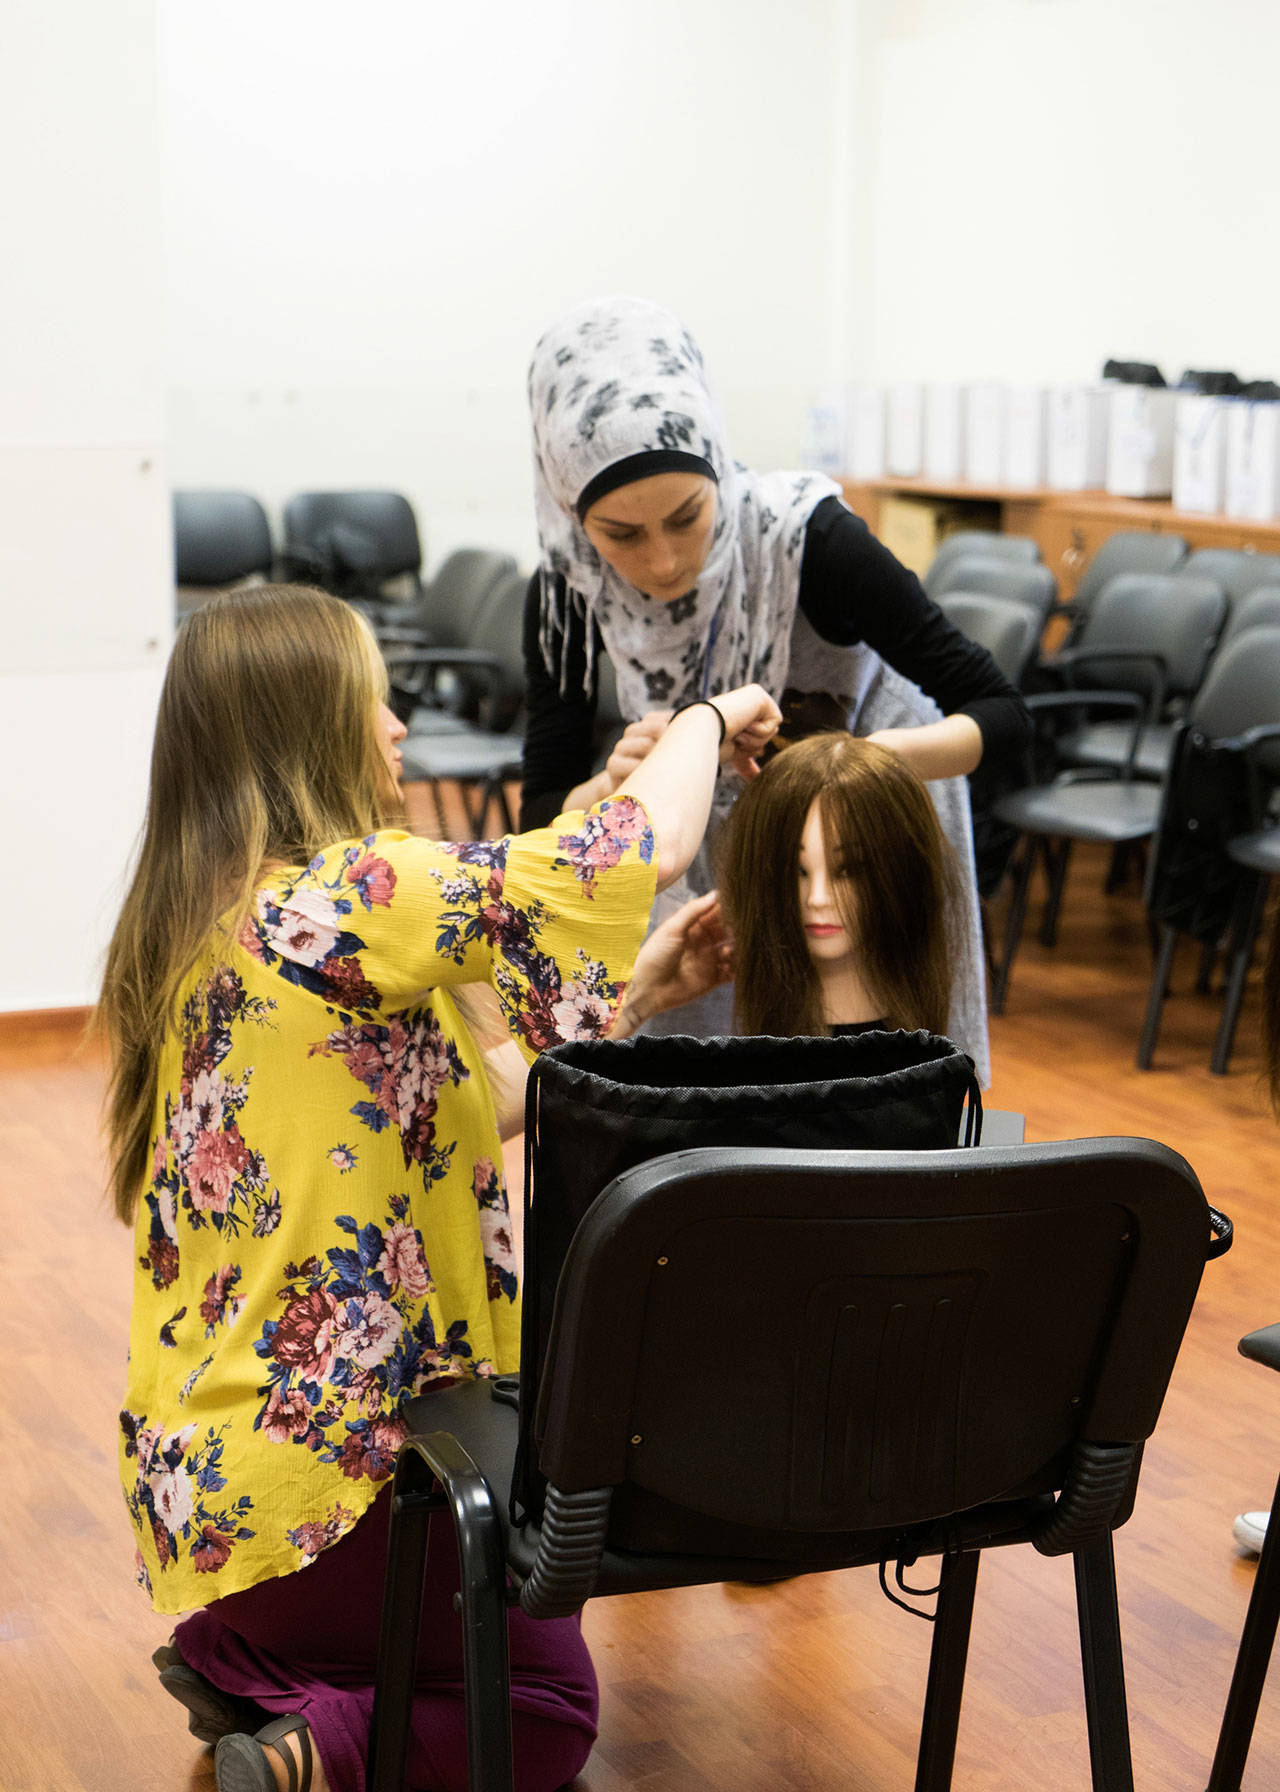 Jessica Dahl of The Beyond Project instructs a student in Lebanon on how to cut hair. Courtesy of Rachel Hile